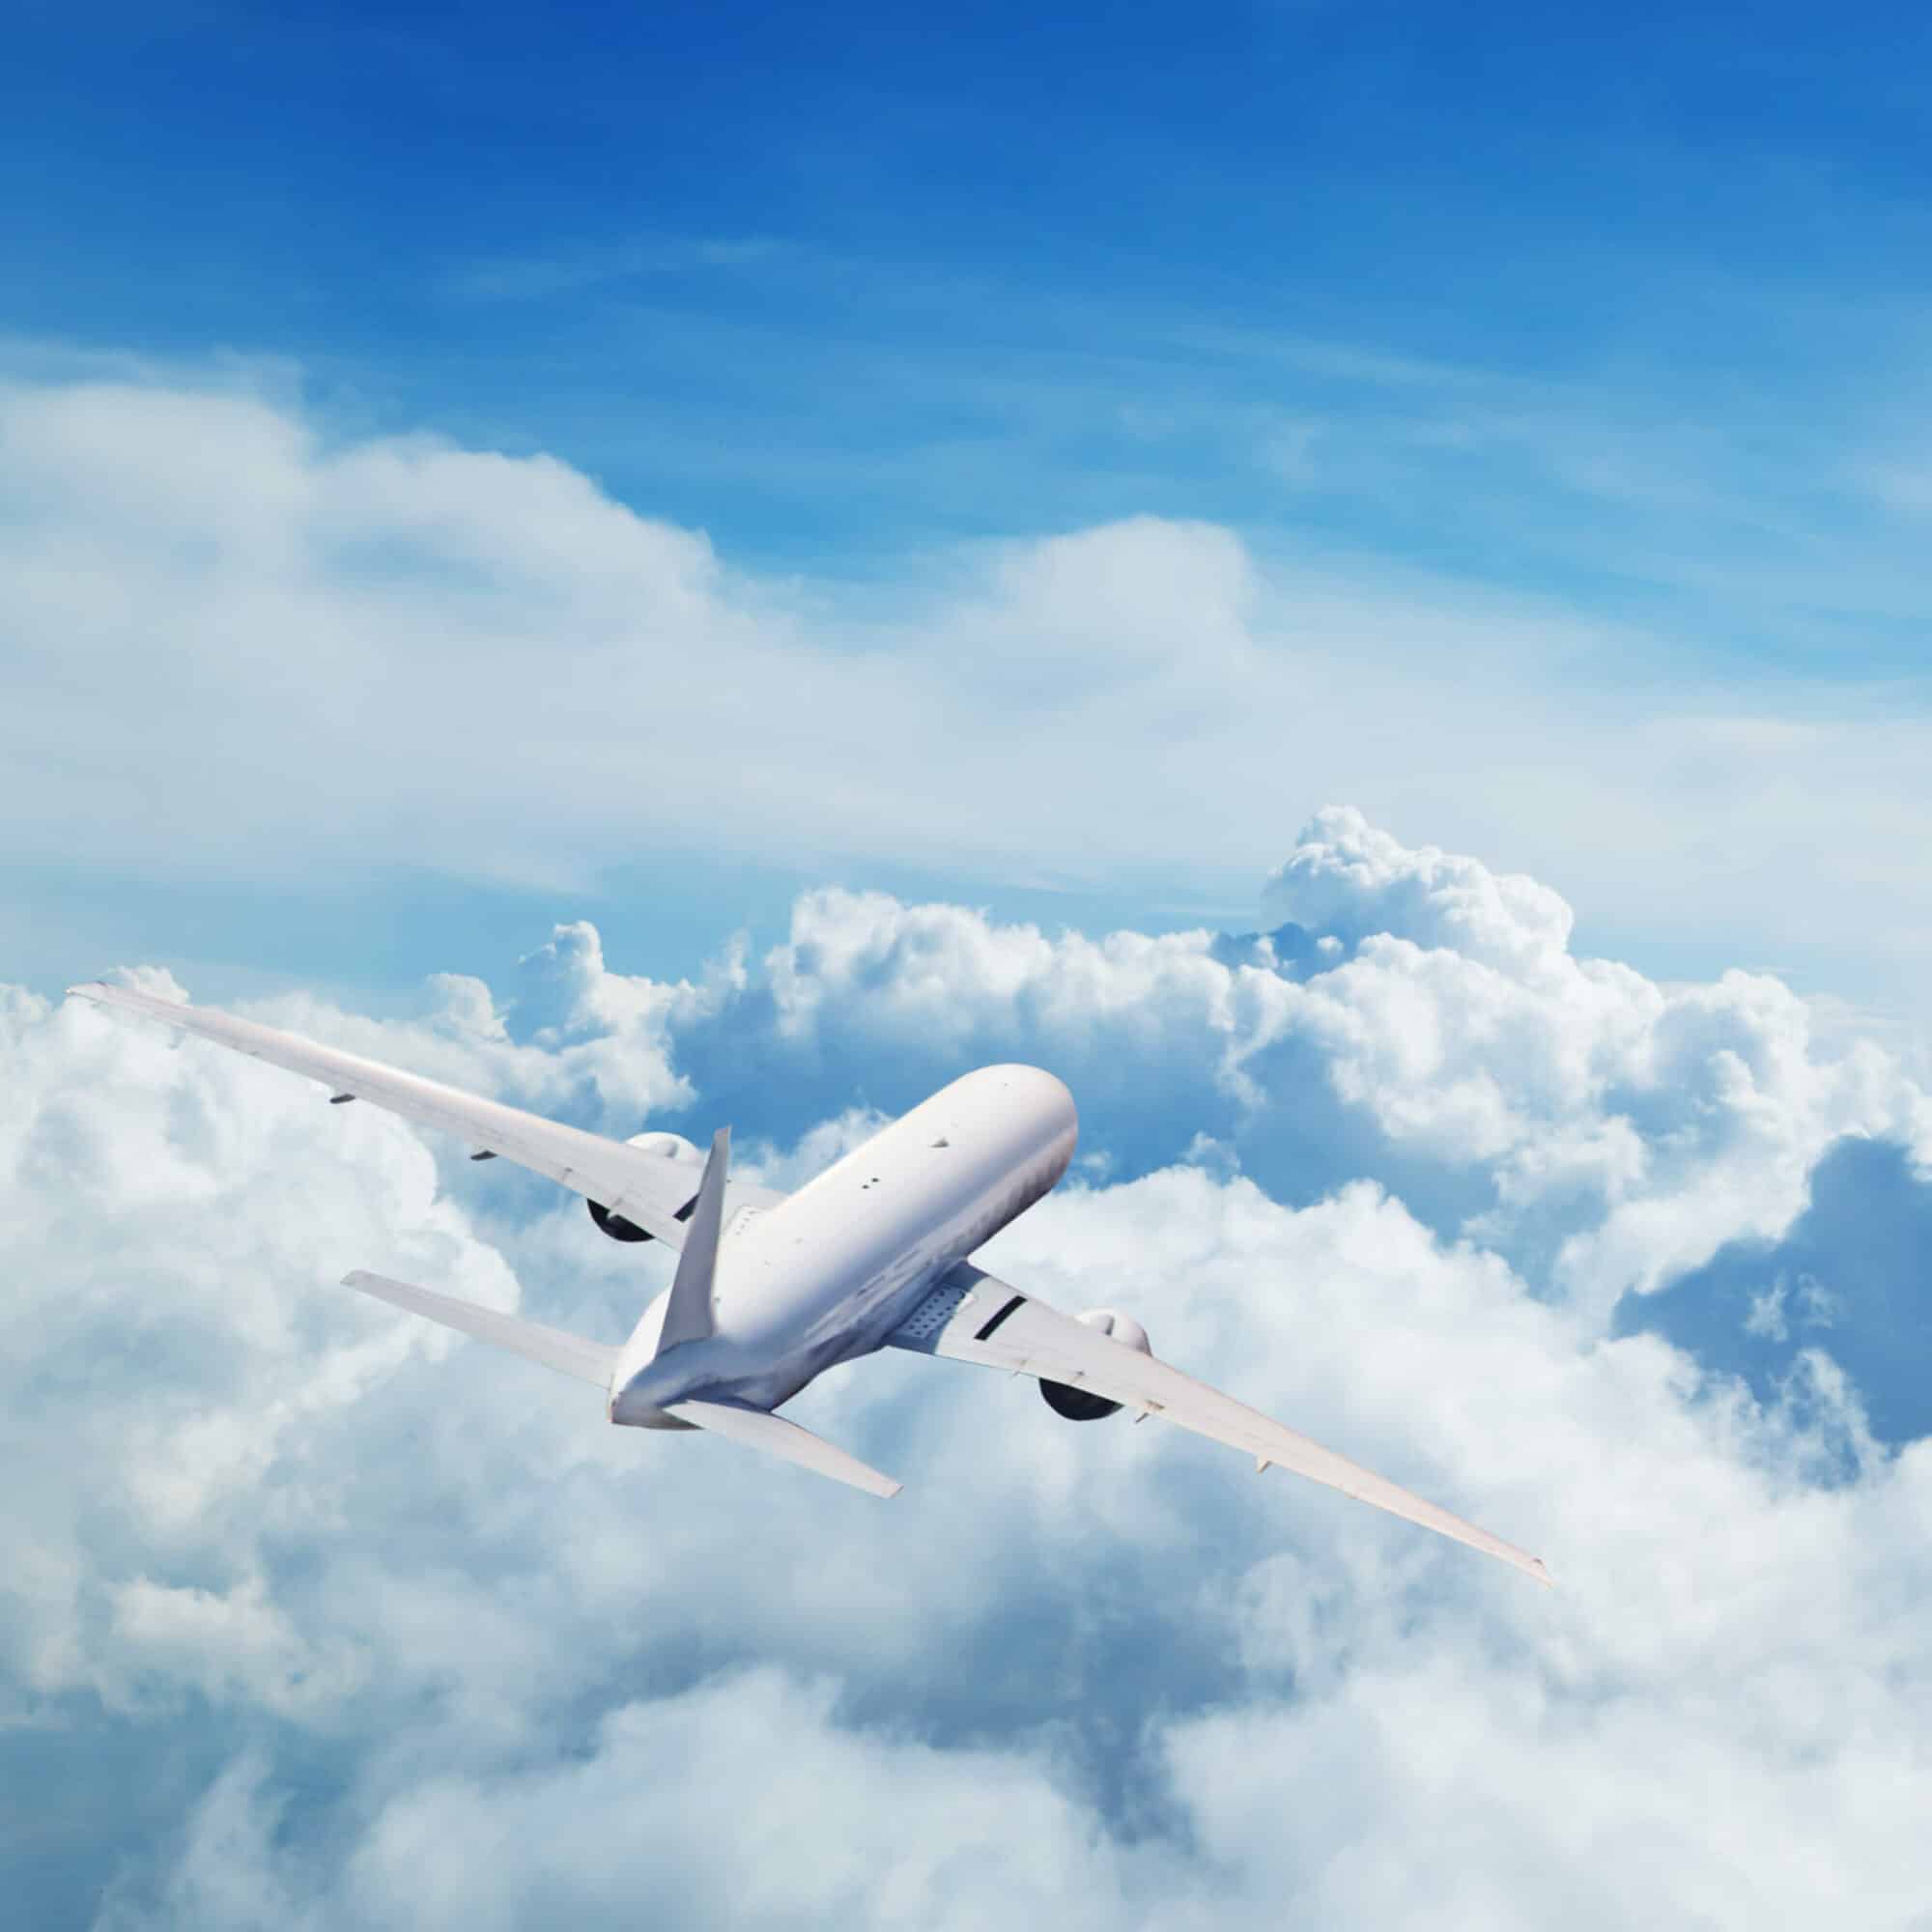 Back view of commercial airplane flying above clouds. Copyspace for text